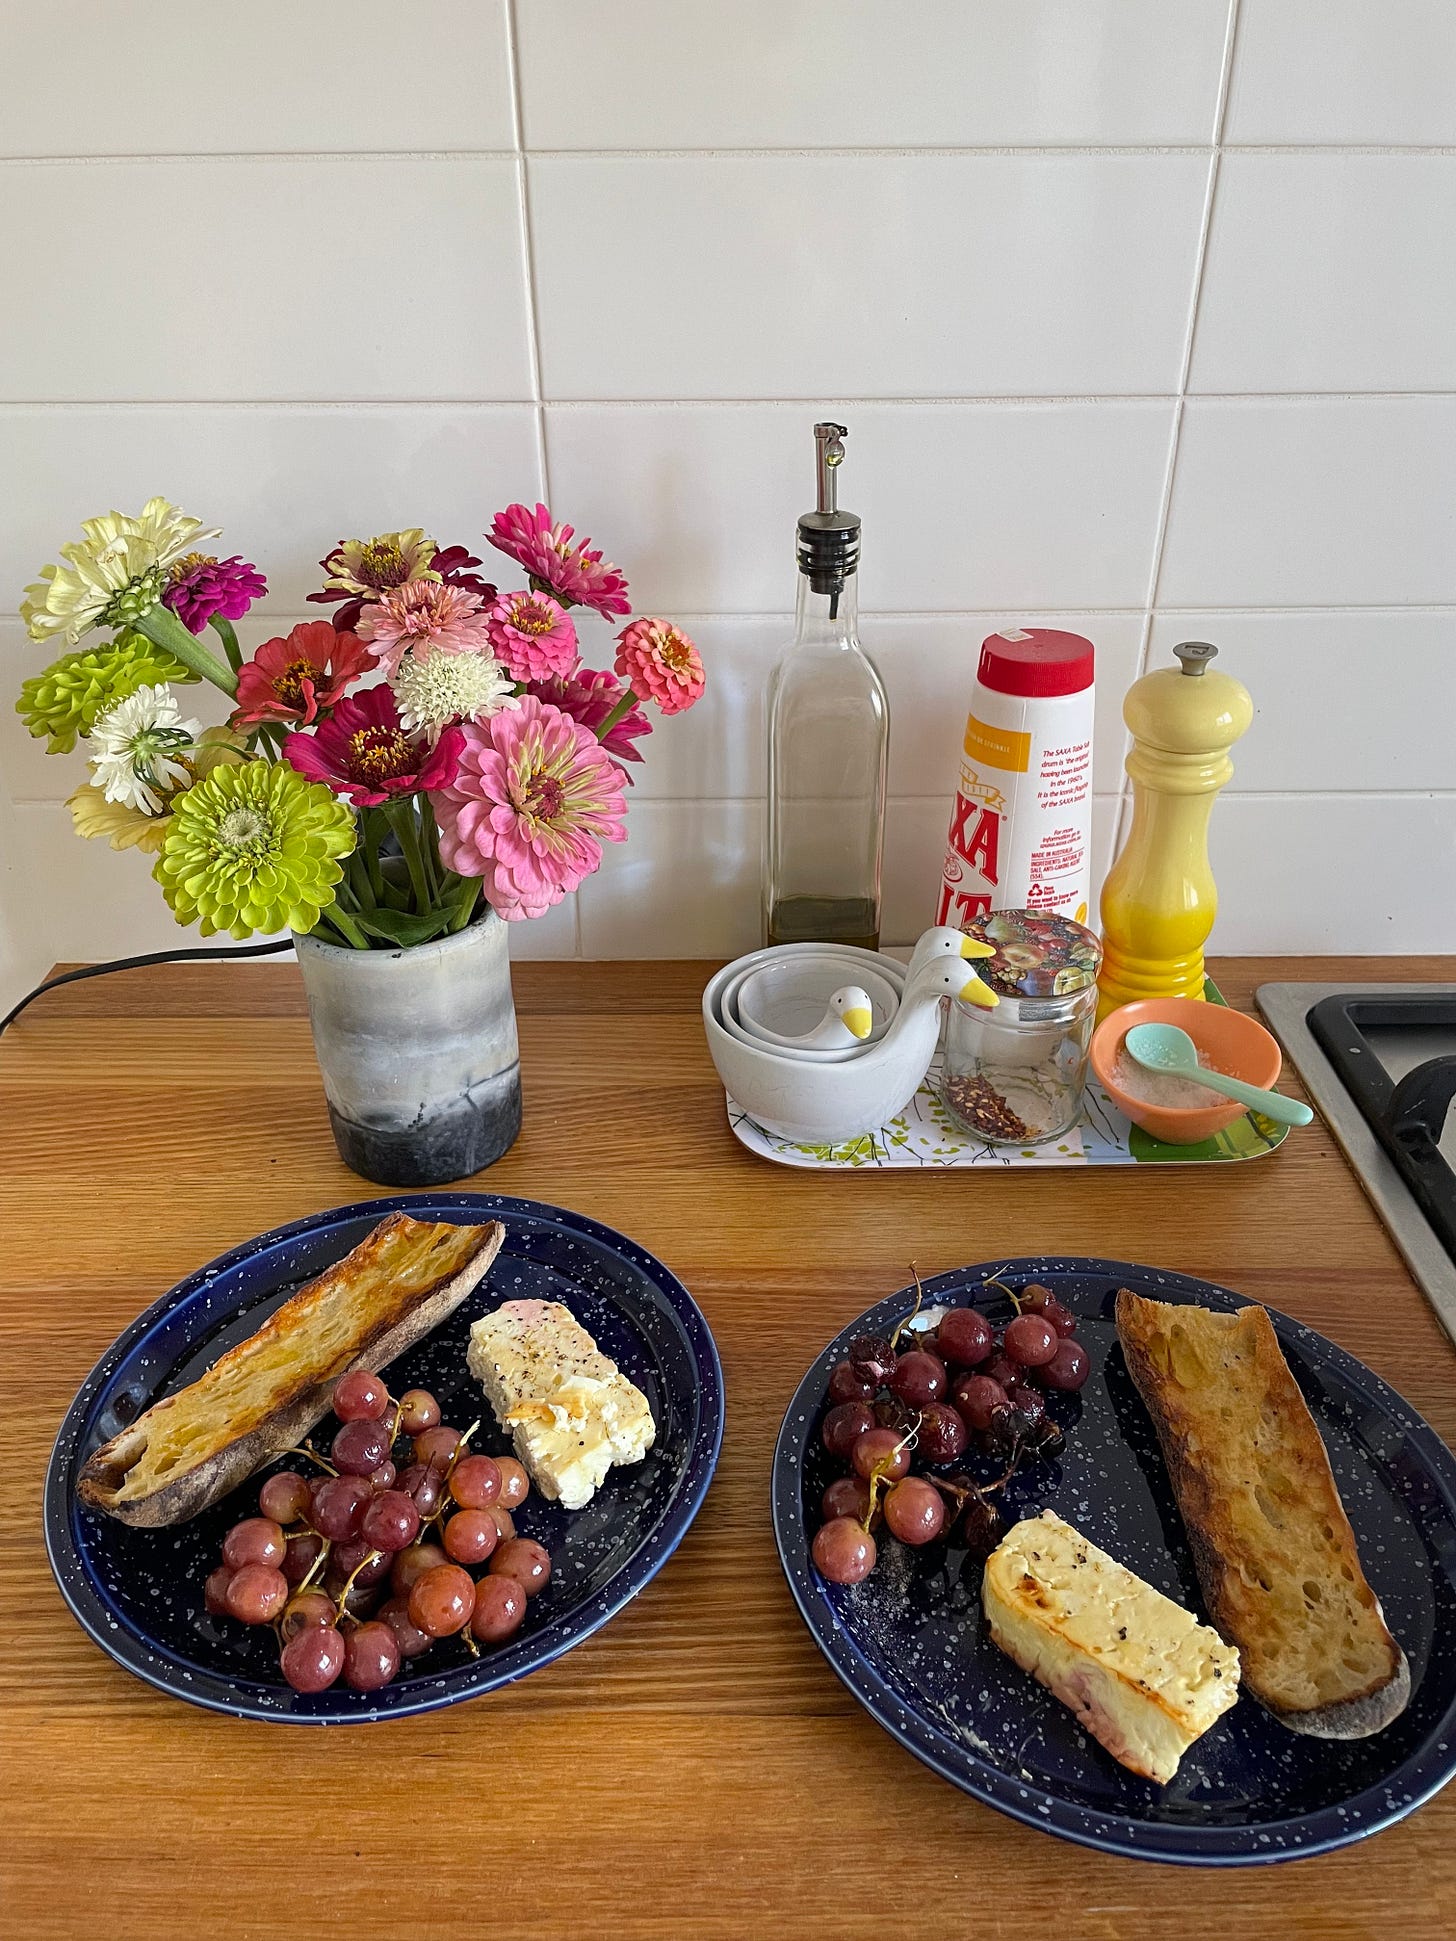 Two plates with roasted red grapes and feta cheese hunks, sitting beside buttered baguettes. It's taken in the kitchen with a small vase of colourful zinnia flowers, and cooking staples like olive oil, sea salt, pepper and chilli flakes in the background.